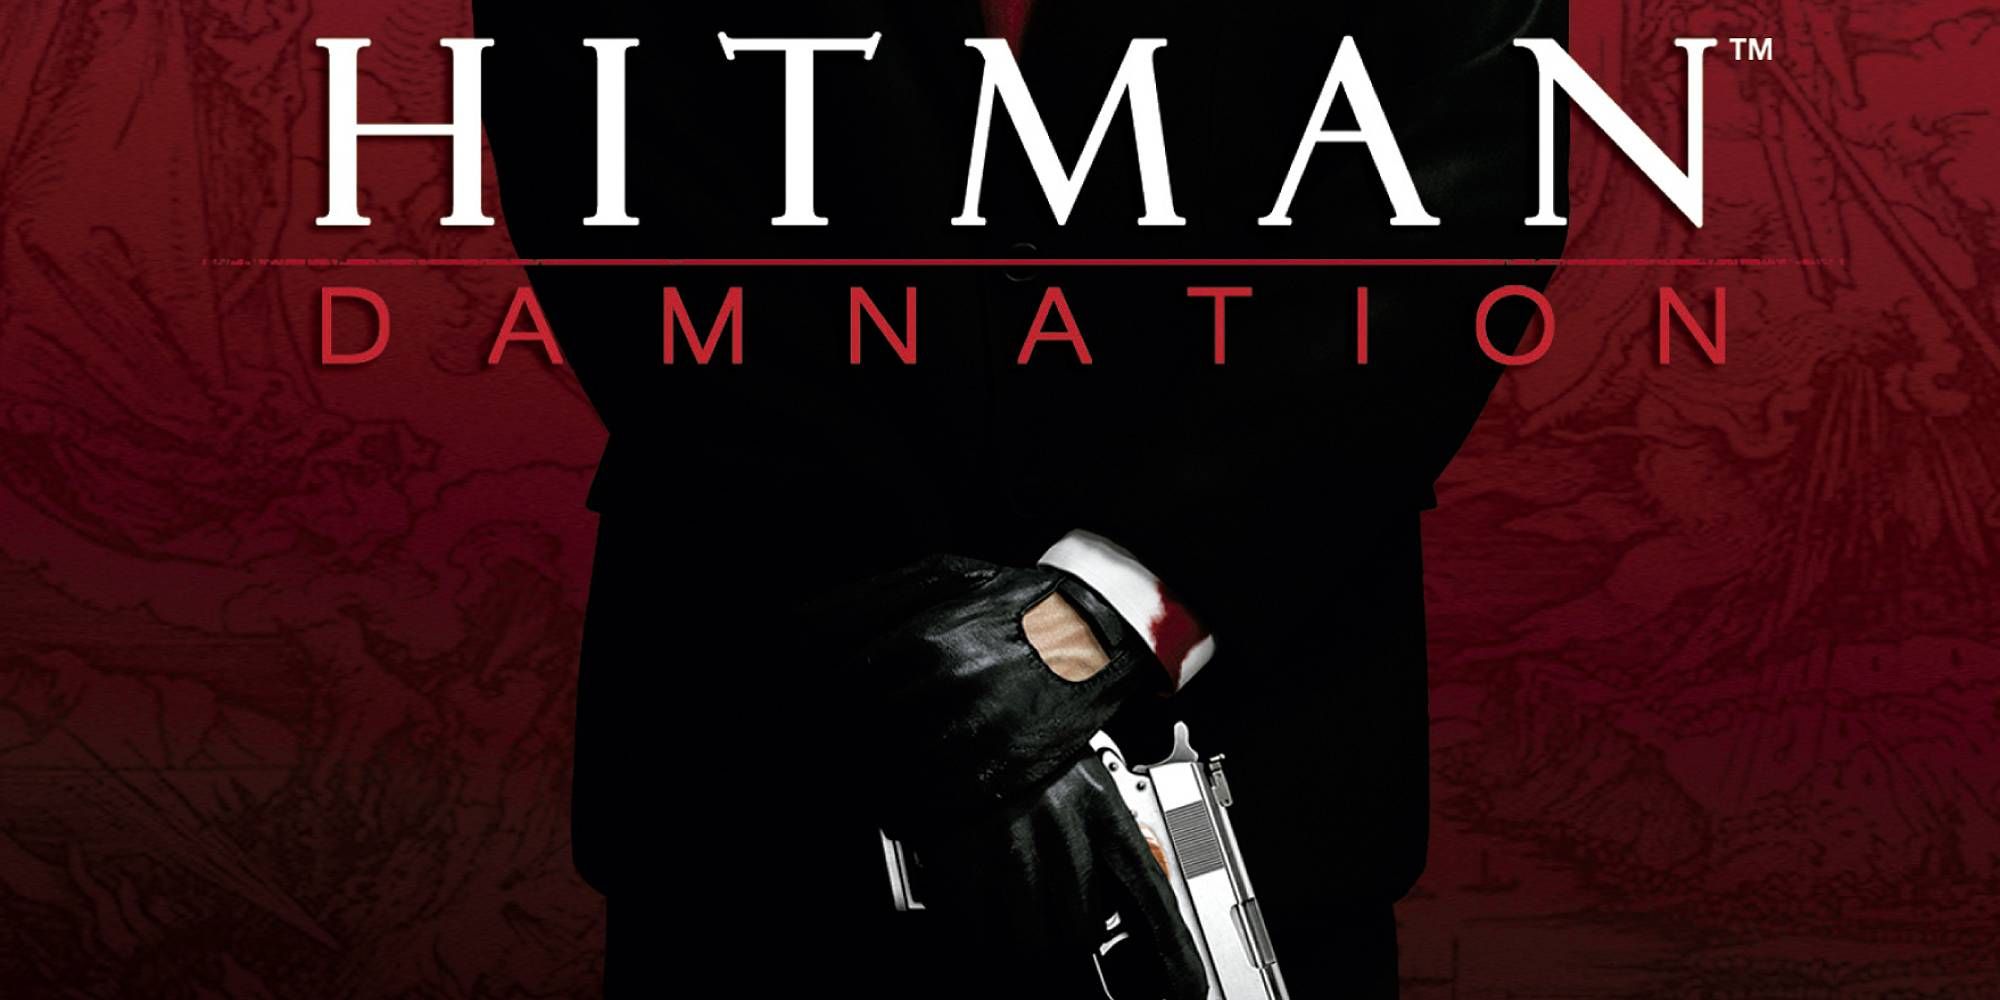 A man in a suit with a weapon on the cover of the Hitman Damnation book